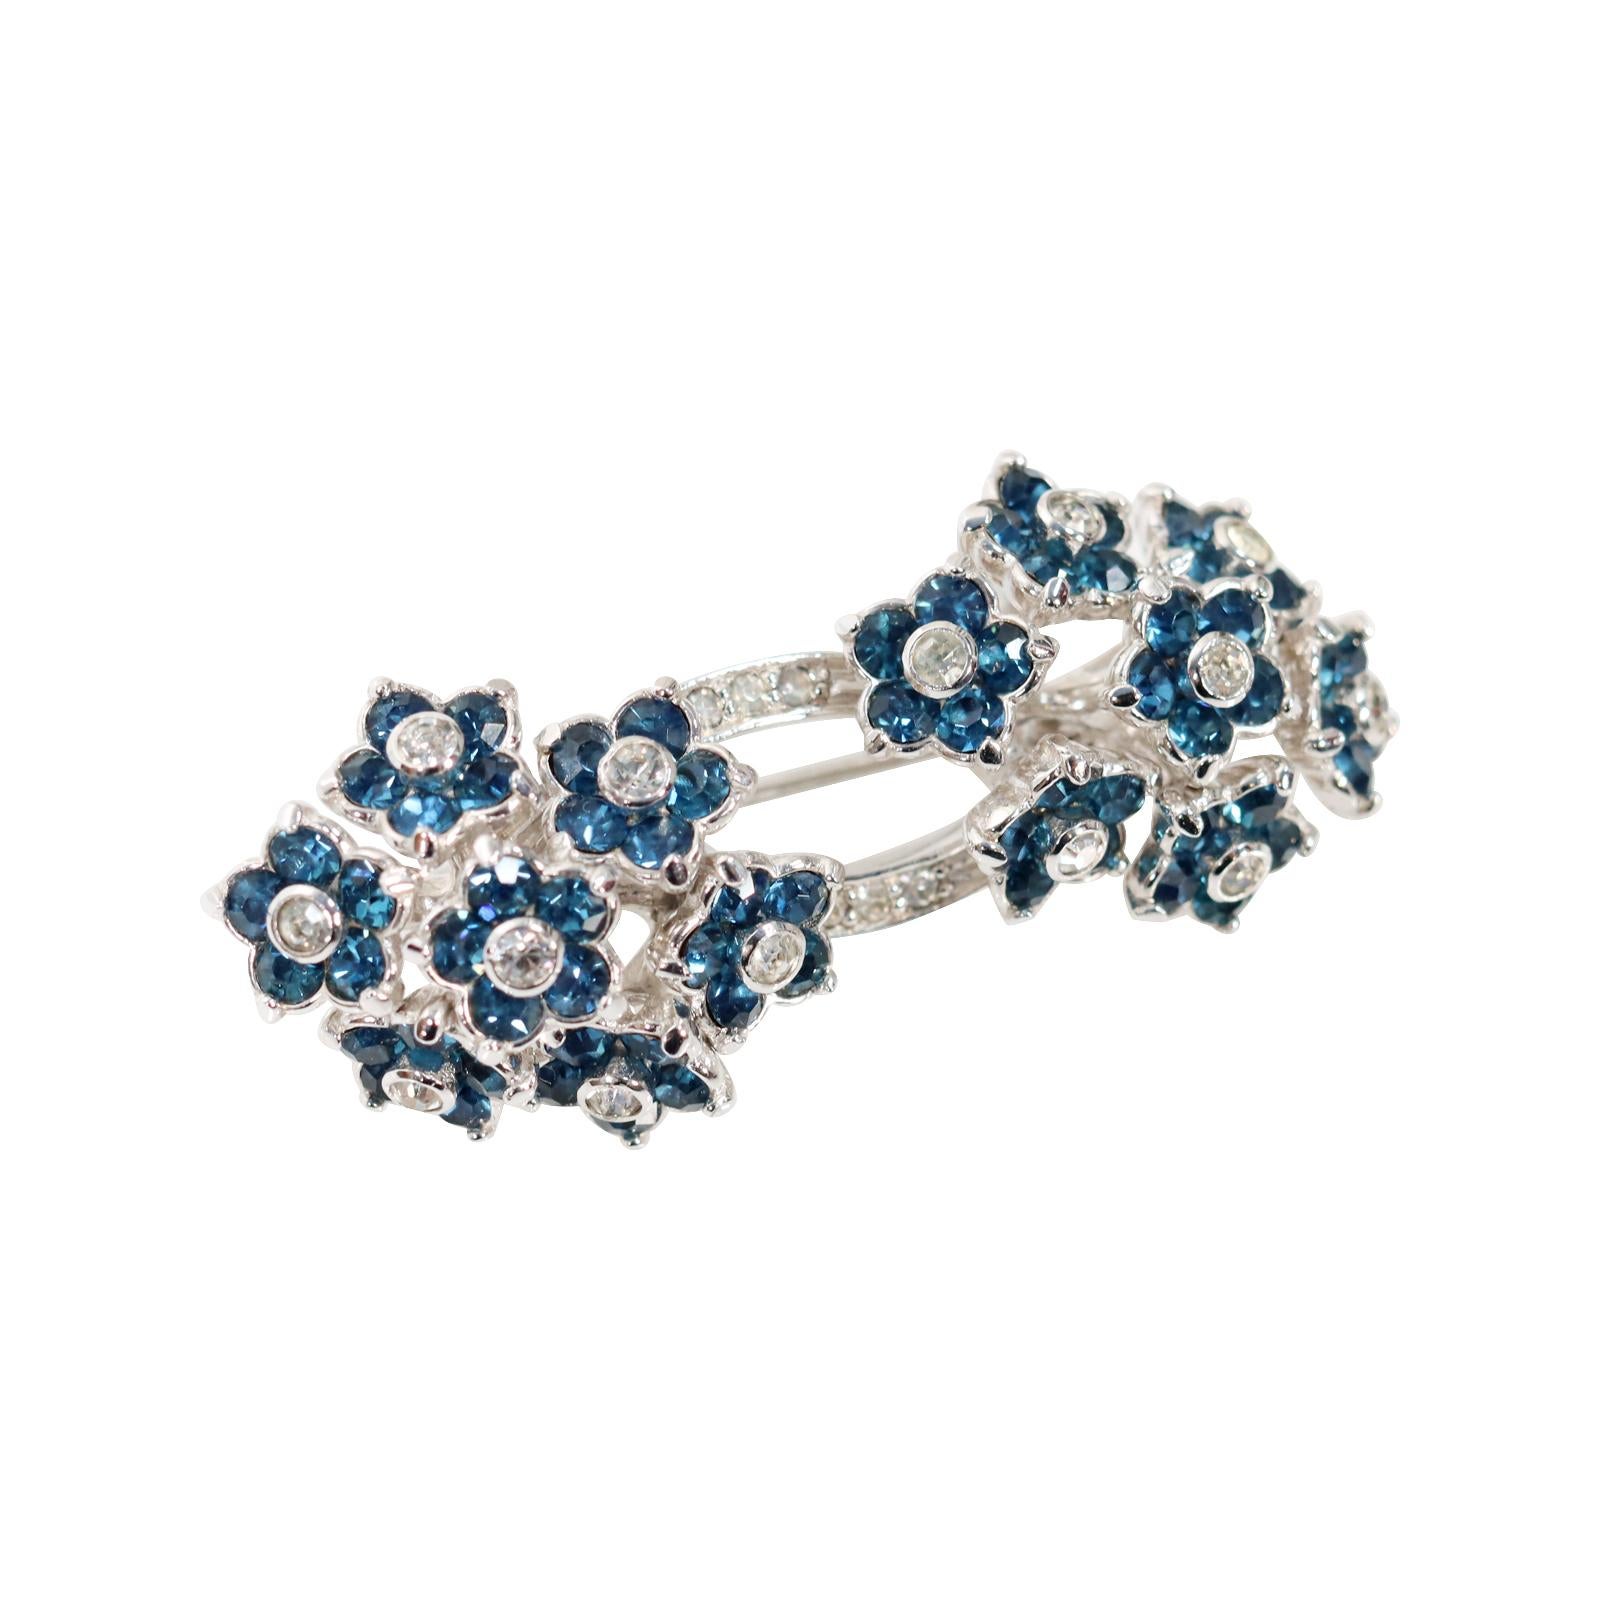 Modern Vintage Pennino Sapphire Blue and Crystal Double Ended Brooch Circa 1960s For Sale